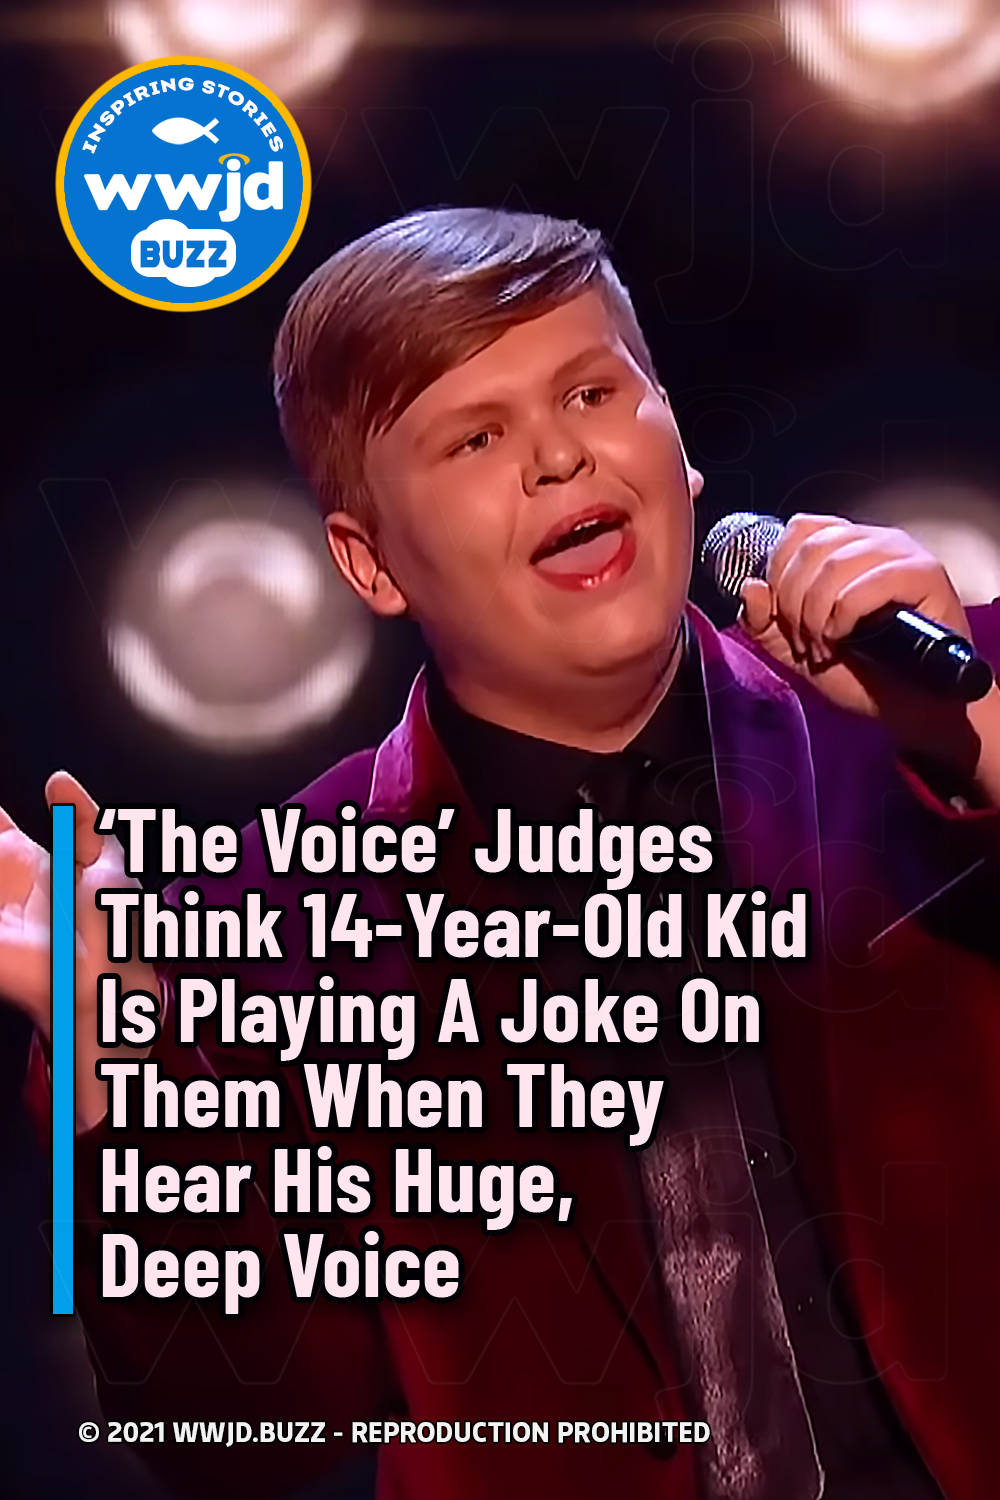 ‘The Voice’ Judges Think 14-Year-Old Kid Is Playing A Joke On Them When They Hear His Huge, Deep Voice